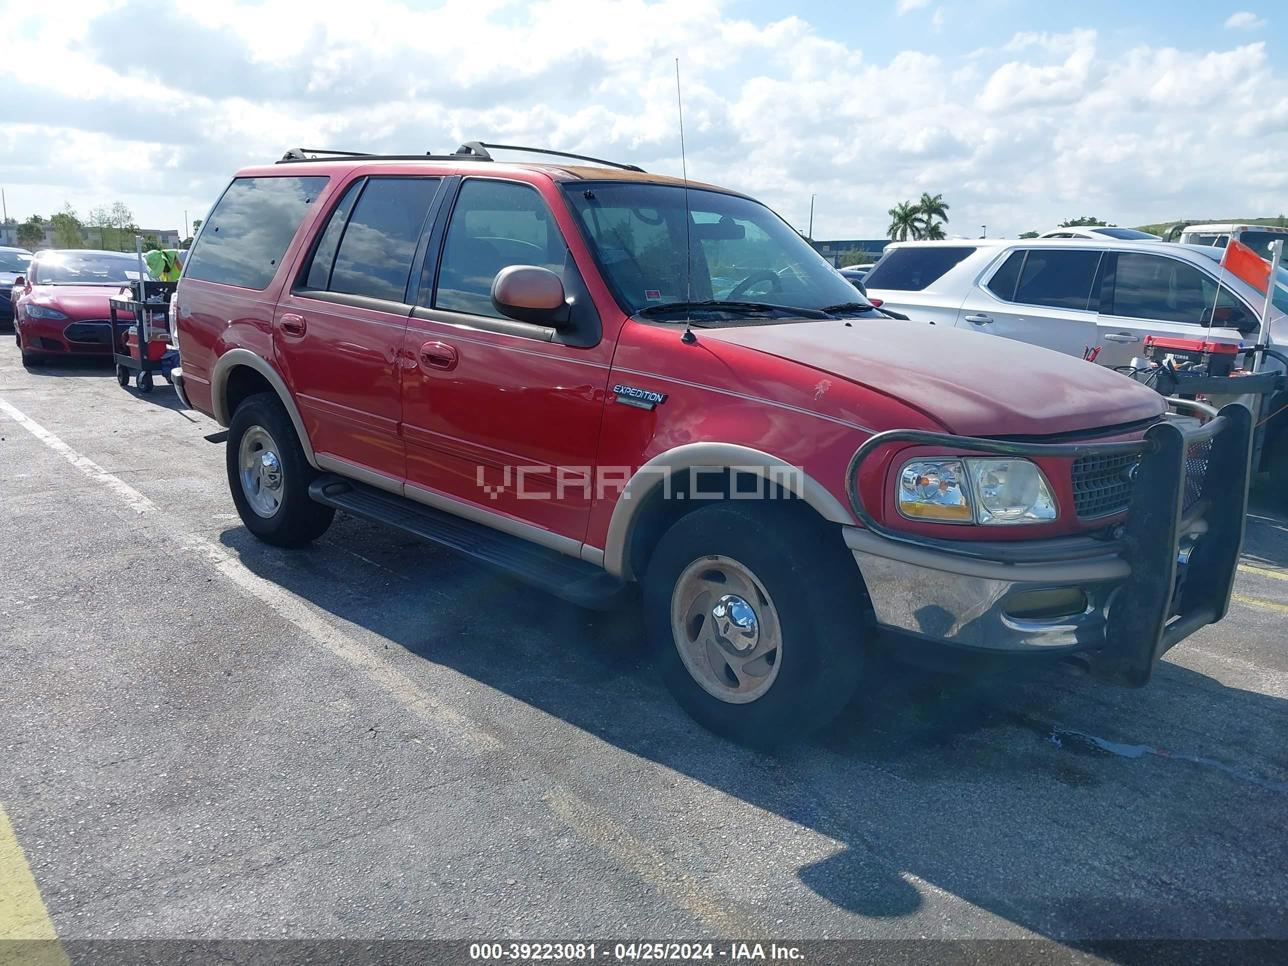 VIN: 1FMFU18LXWLA05857 - ford expedition